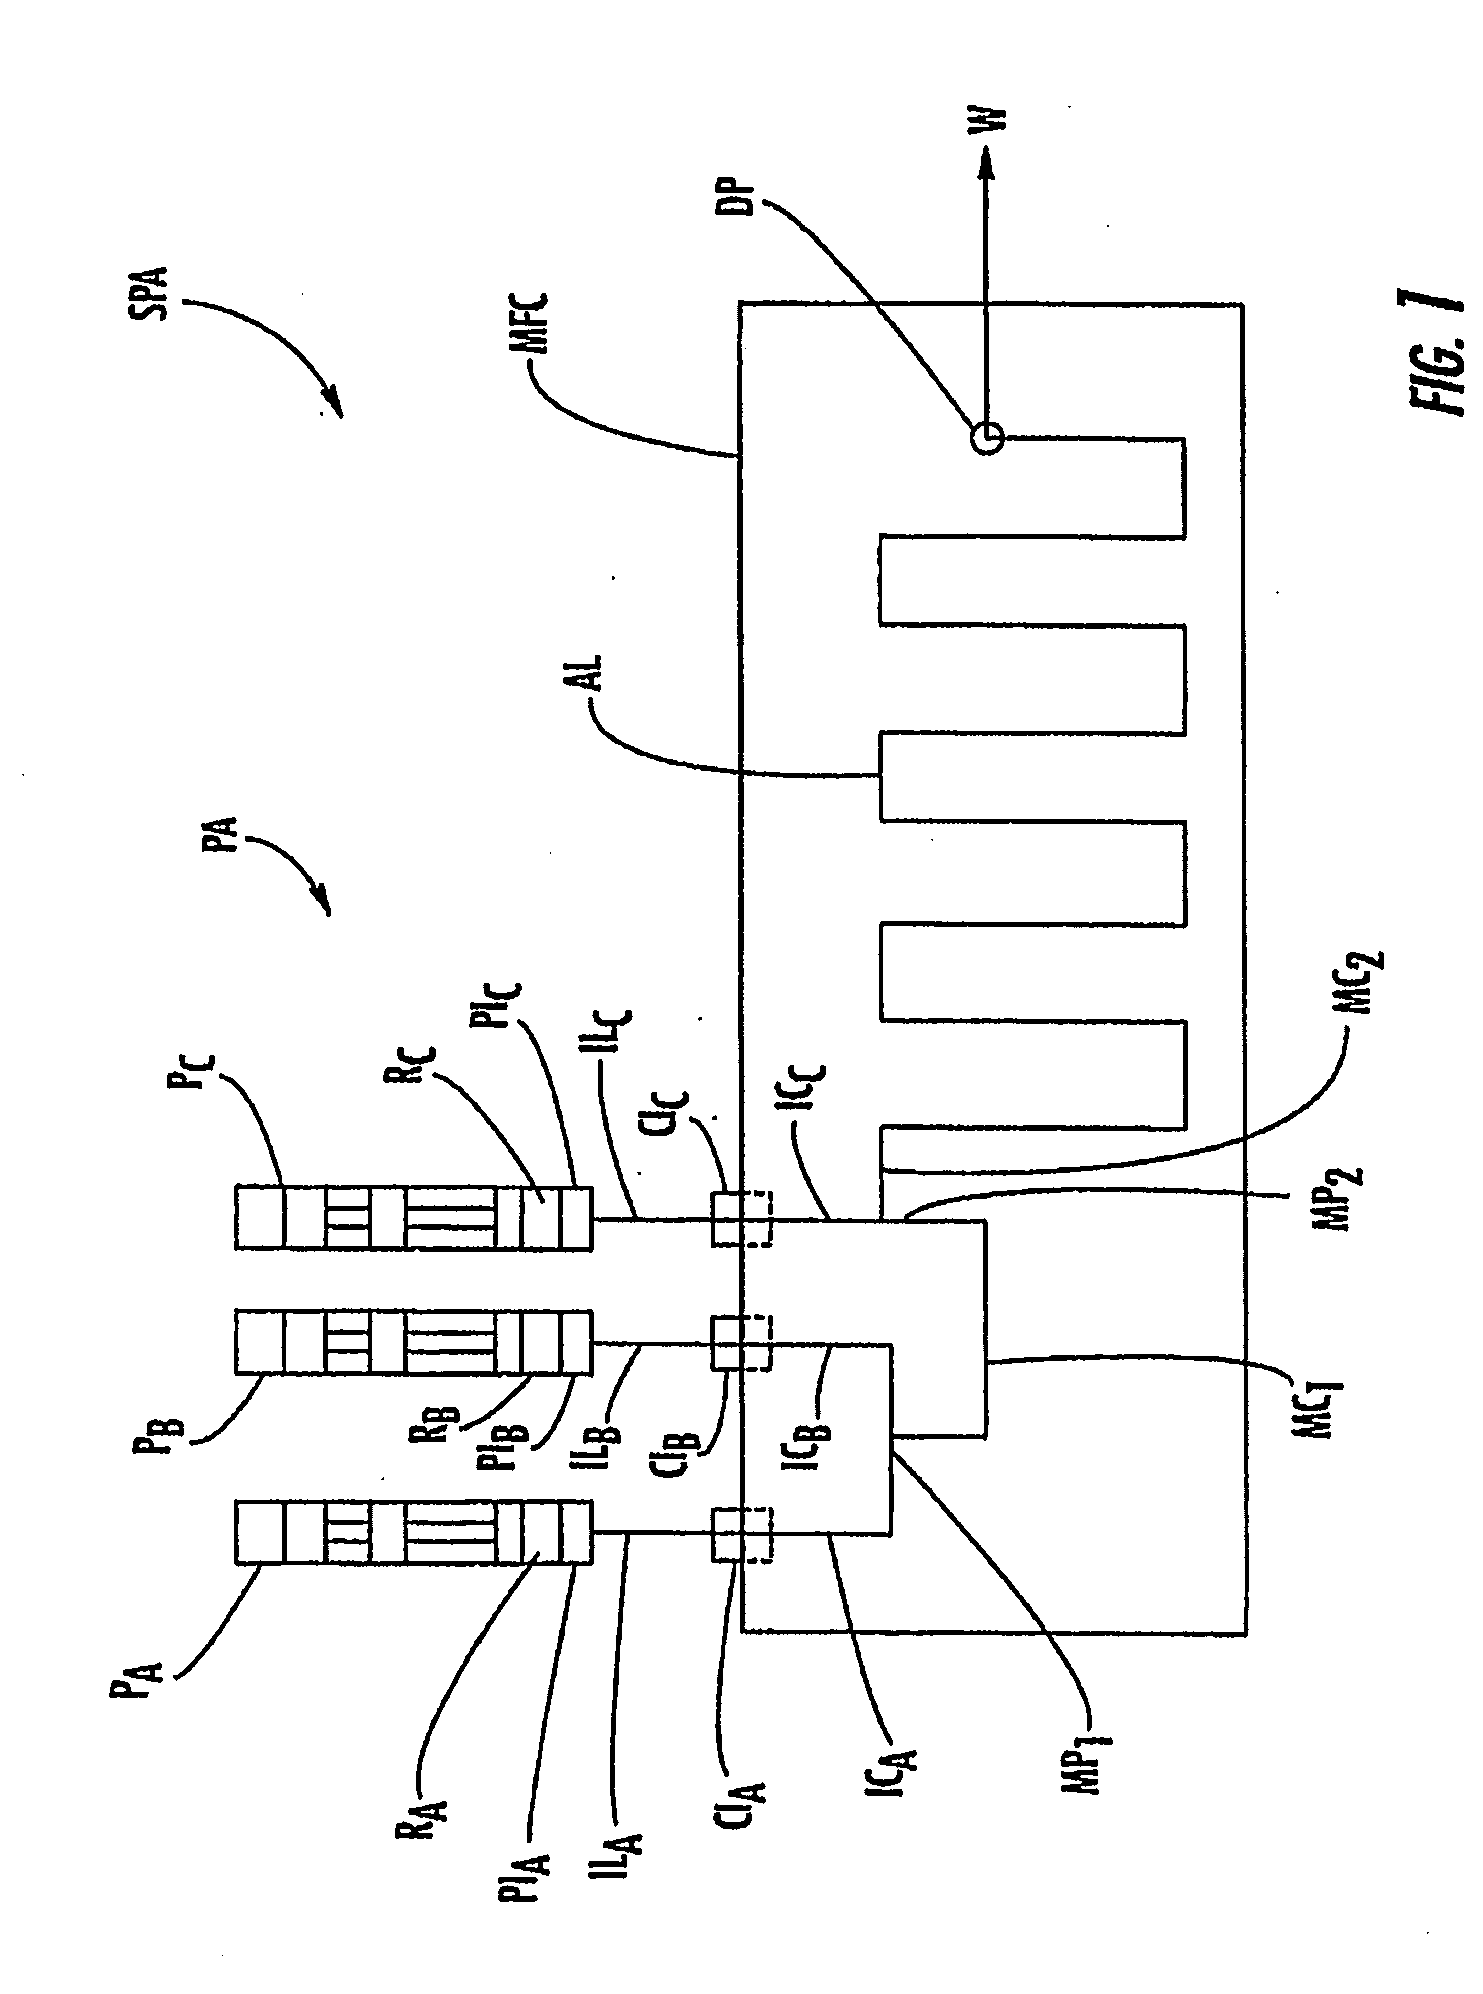 Microfluid based apparatus and method for thermal regulation and noise reduction